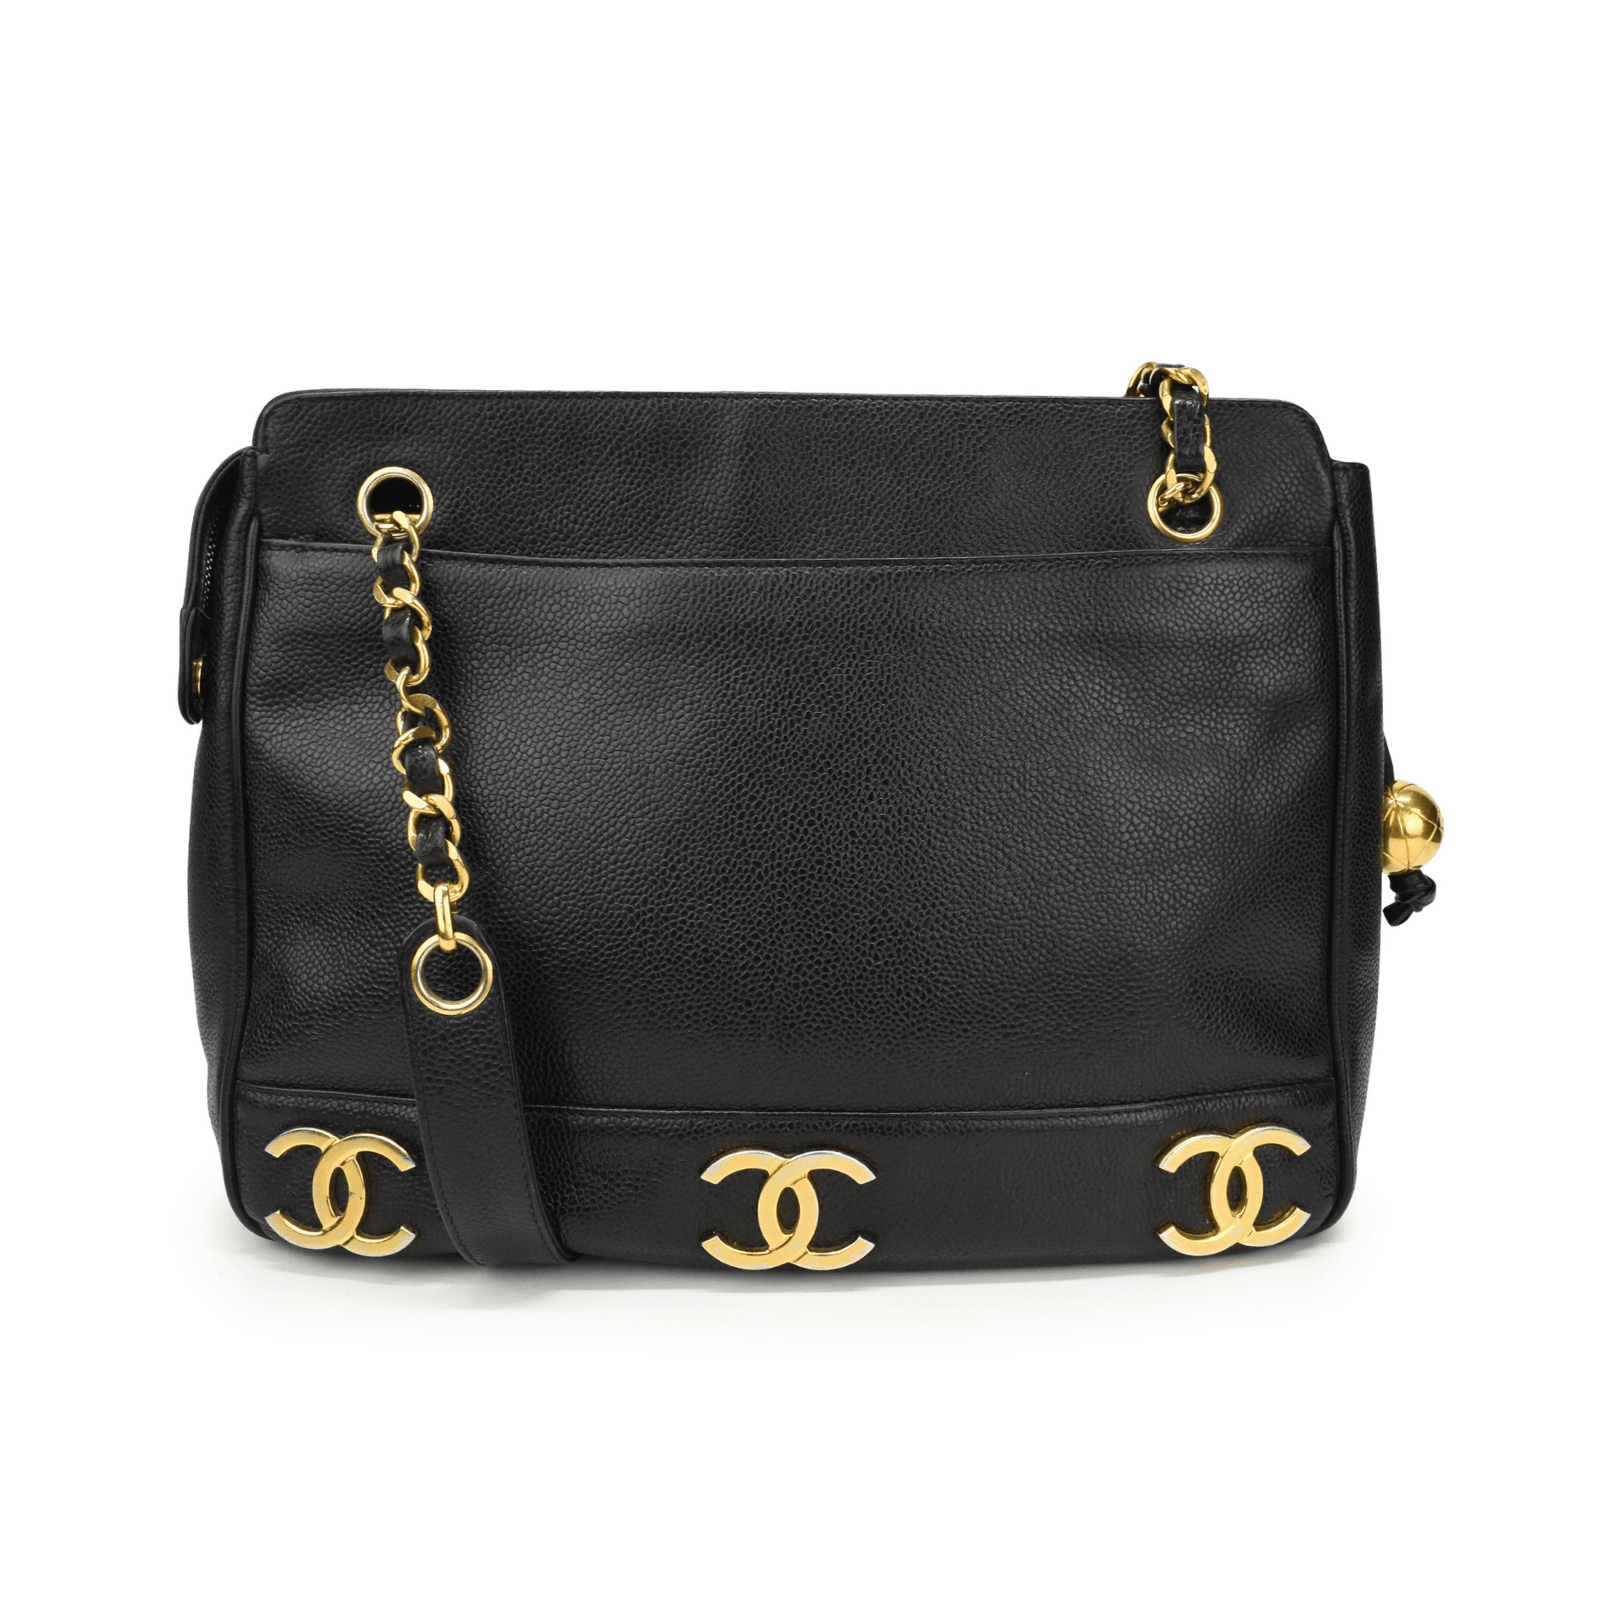 Chanel Tote Bag - Fashionably Yours